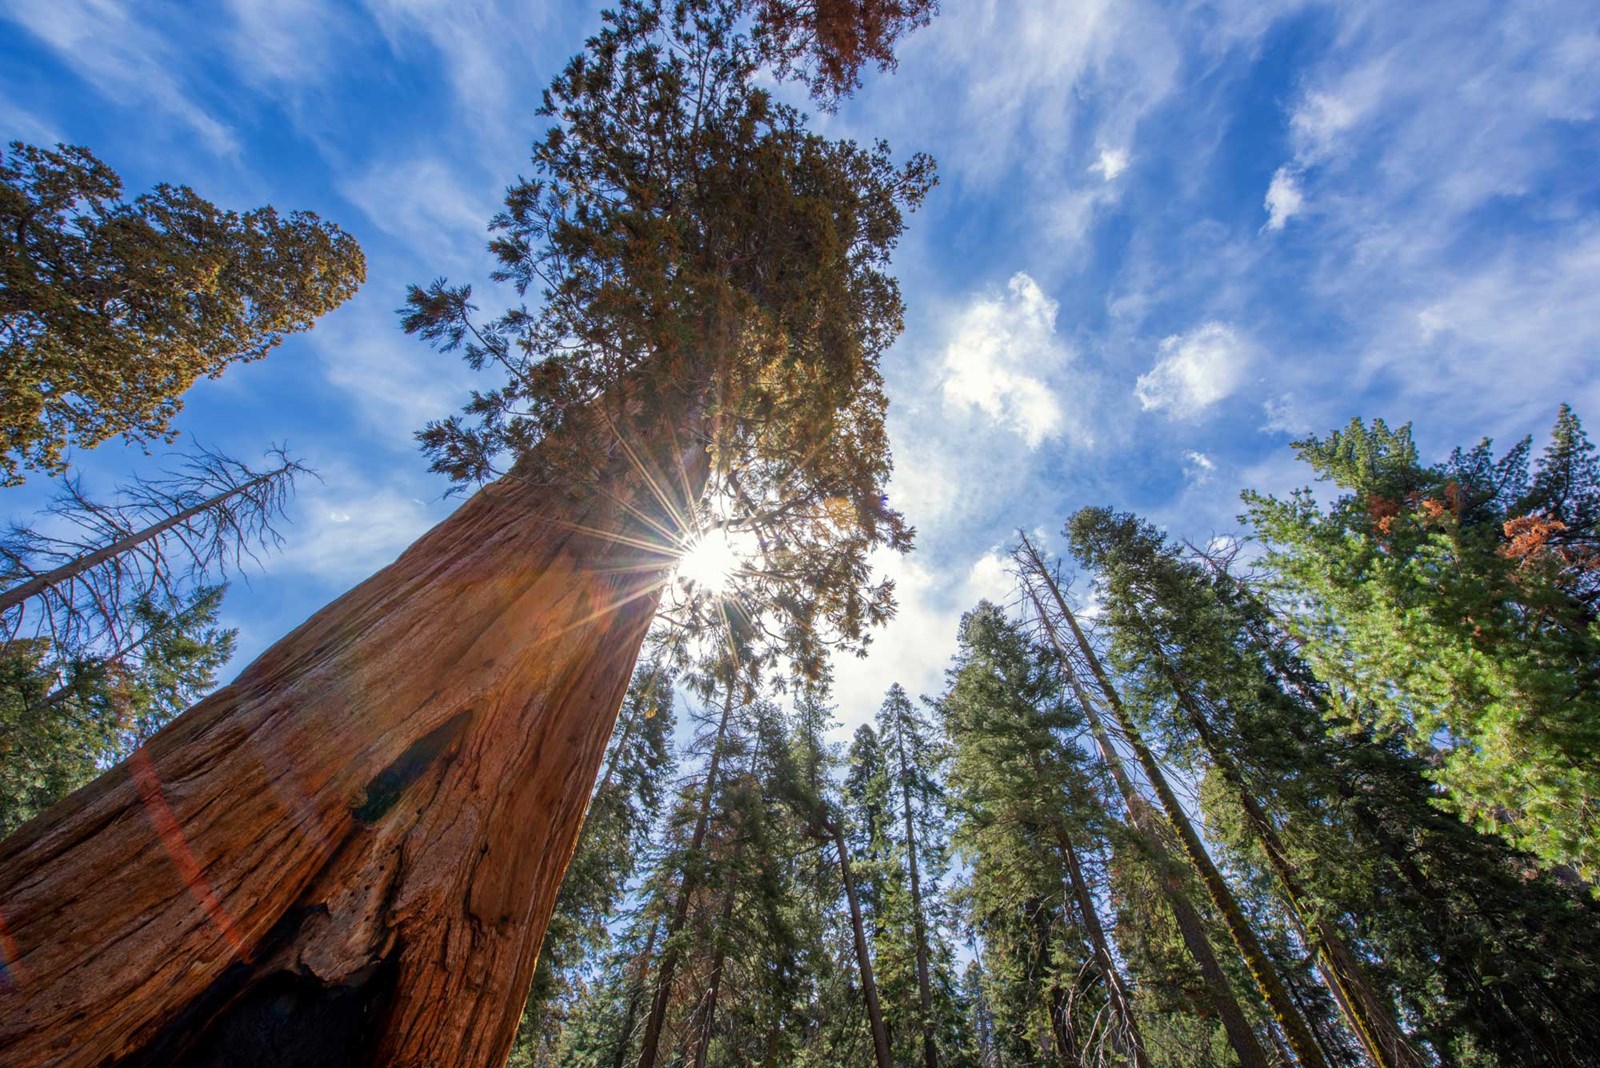 Looking up with a wide angle lens at a giant Sequoia tree with the sun bursting through on a partly cloudy day.